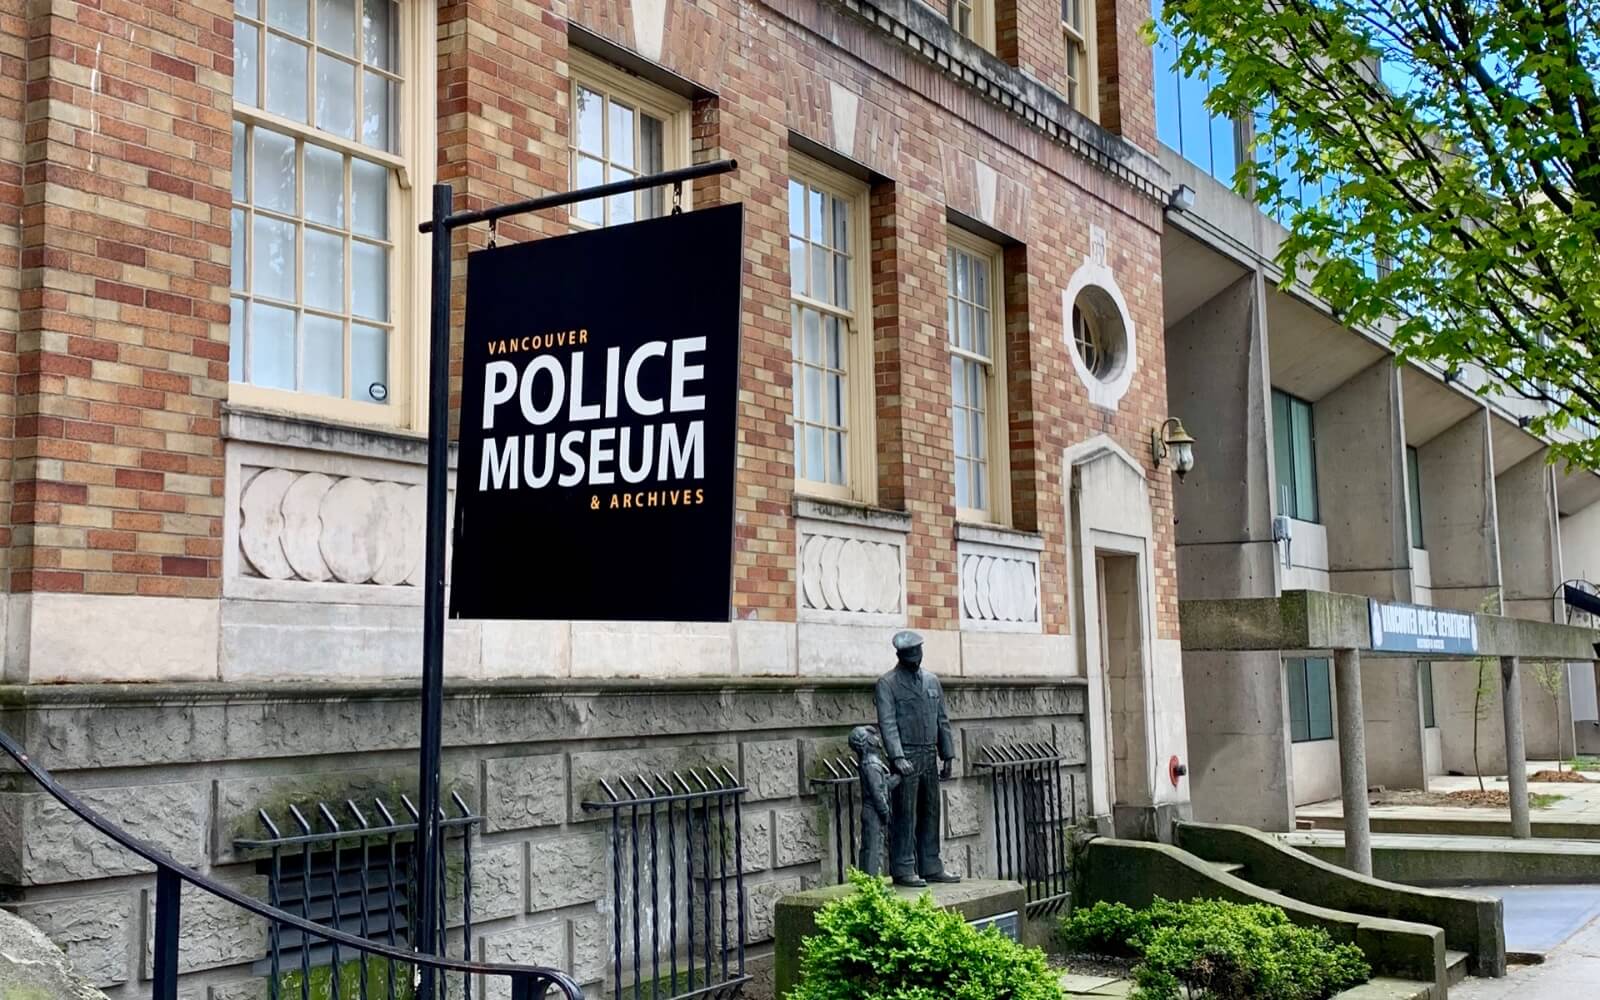 The entrance to the Vancouver Police Museum